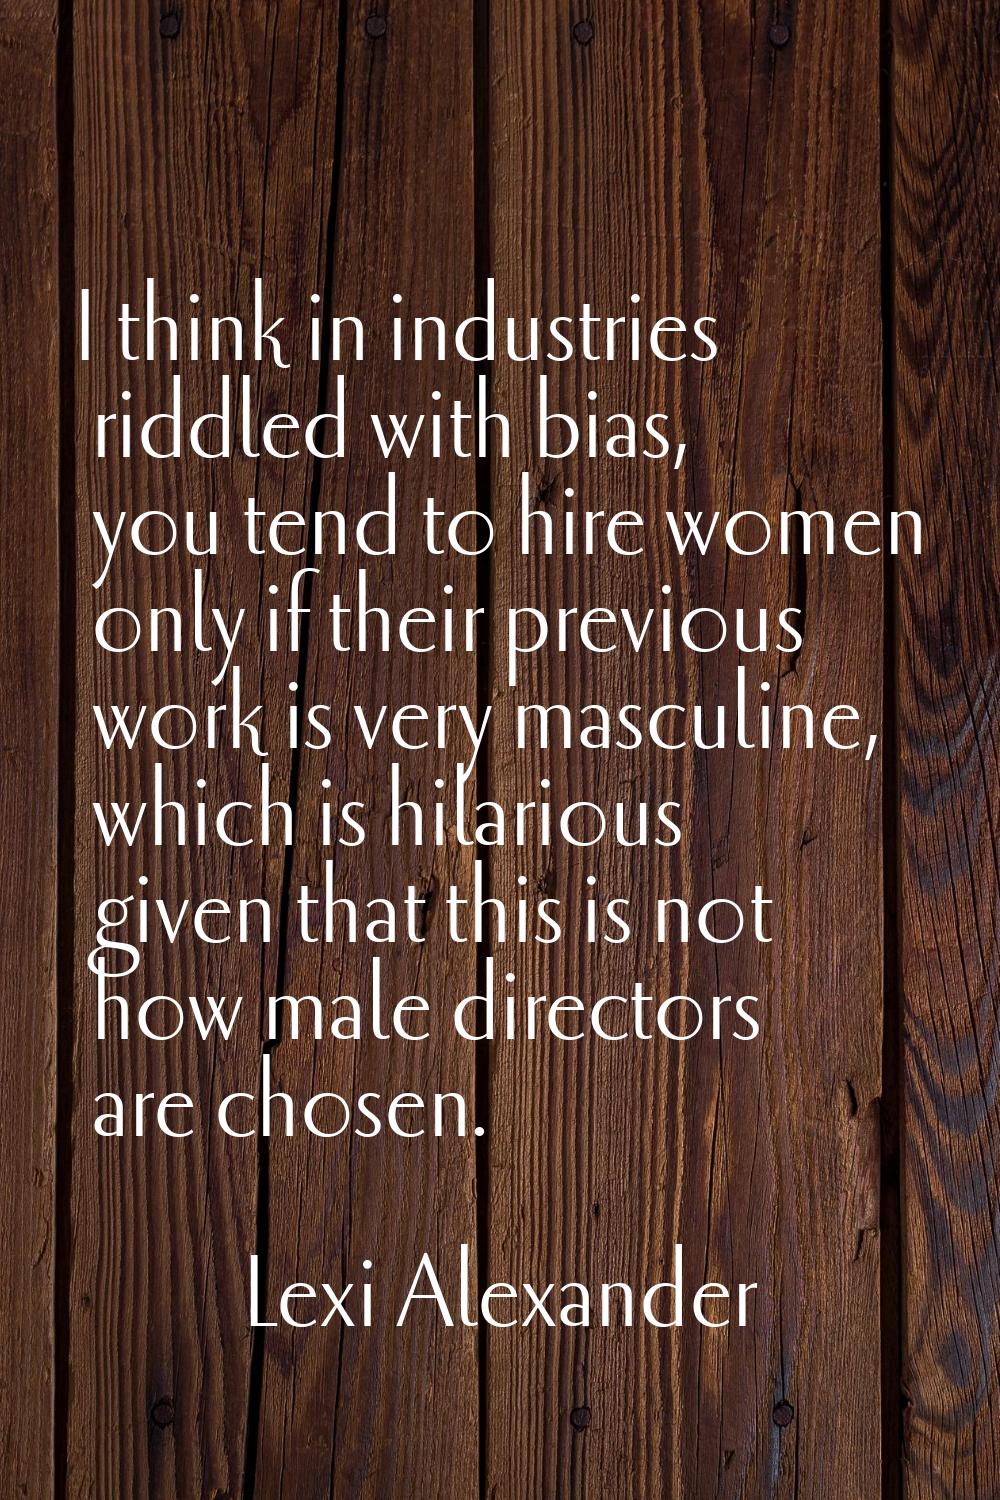 I think in industries riddled with bias, you tend to hire women only if their previous work is very